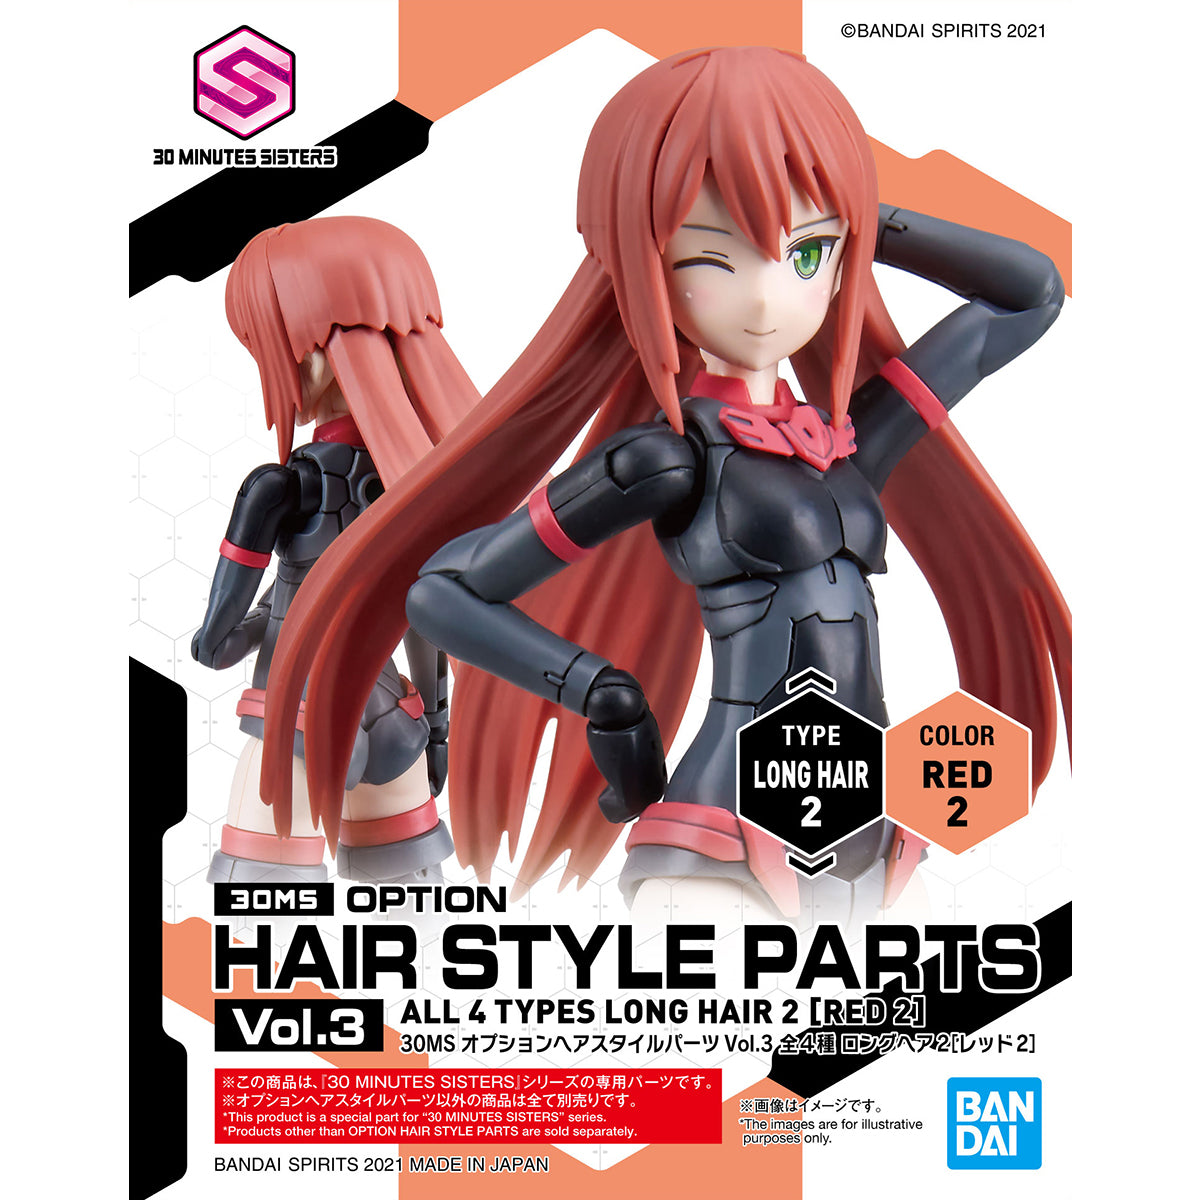 30MS OPTION HAIR STYLE PARTS Vol.3 All 4 TYPES